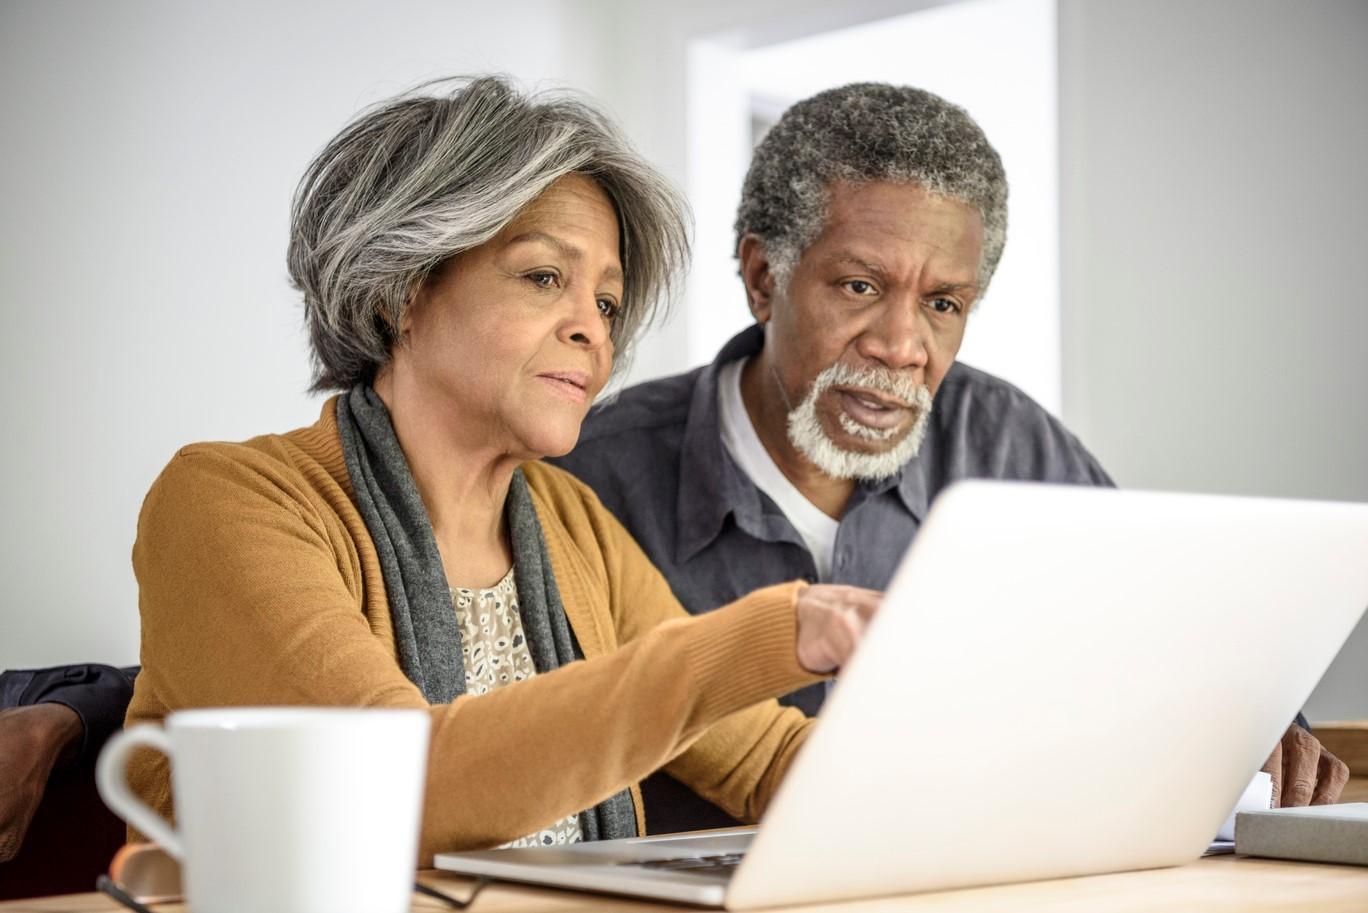 Older couple using a computer